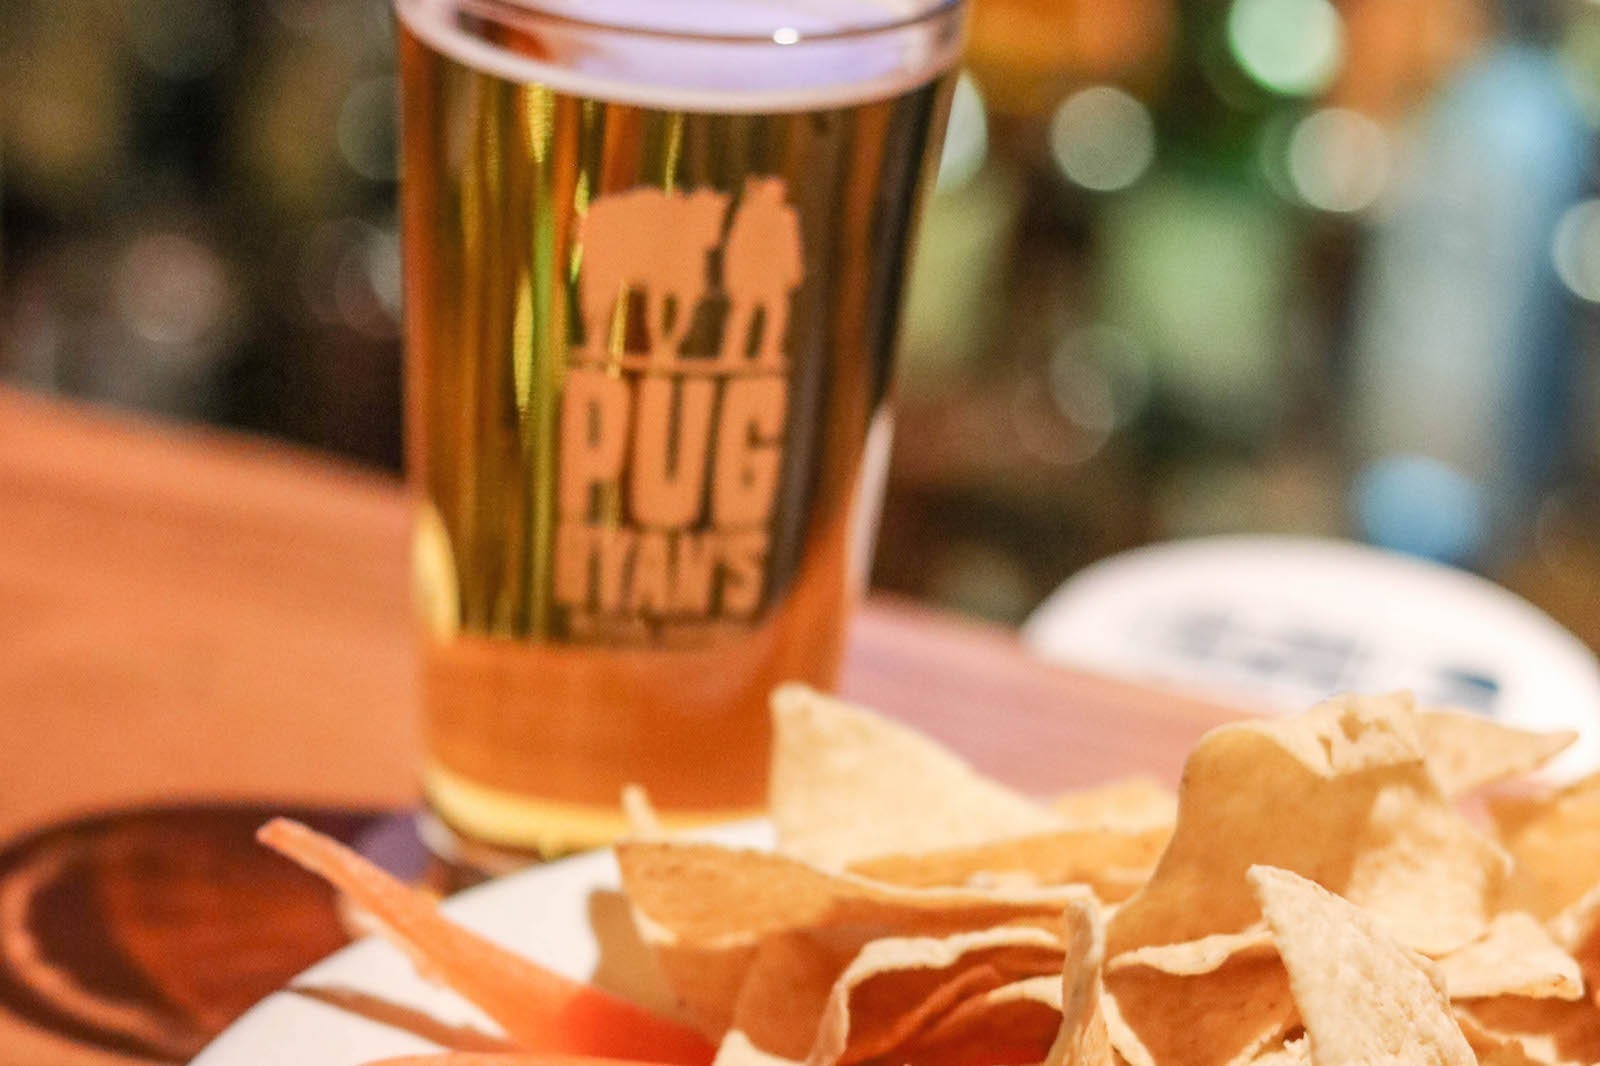 A beer and chips at a local brewery in Dillon, Colorado